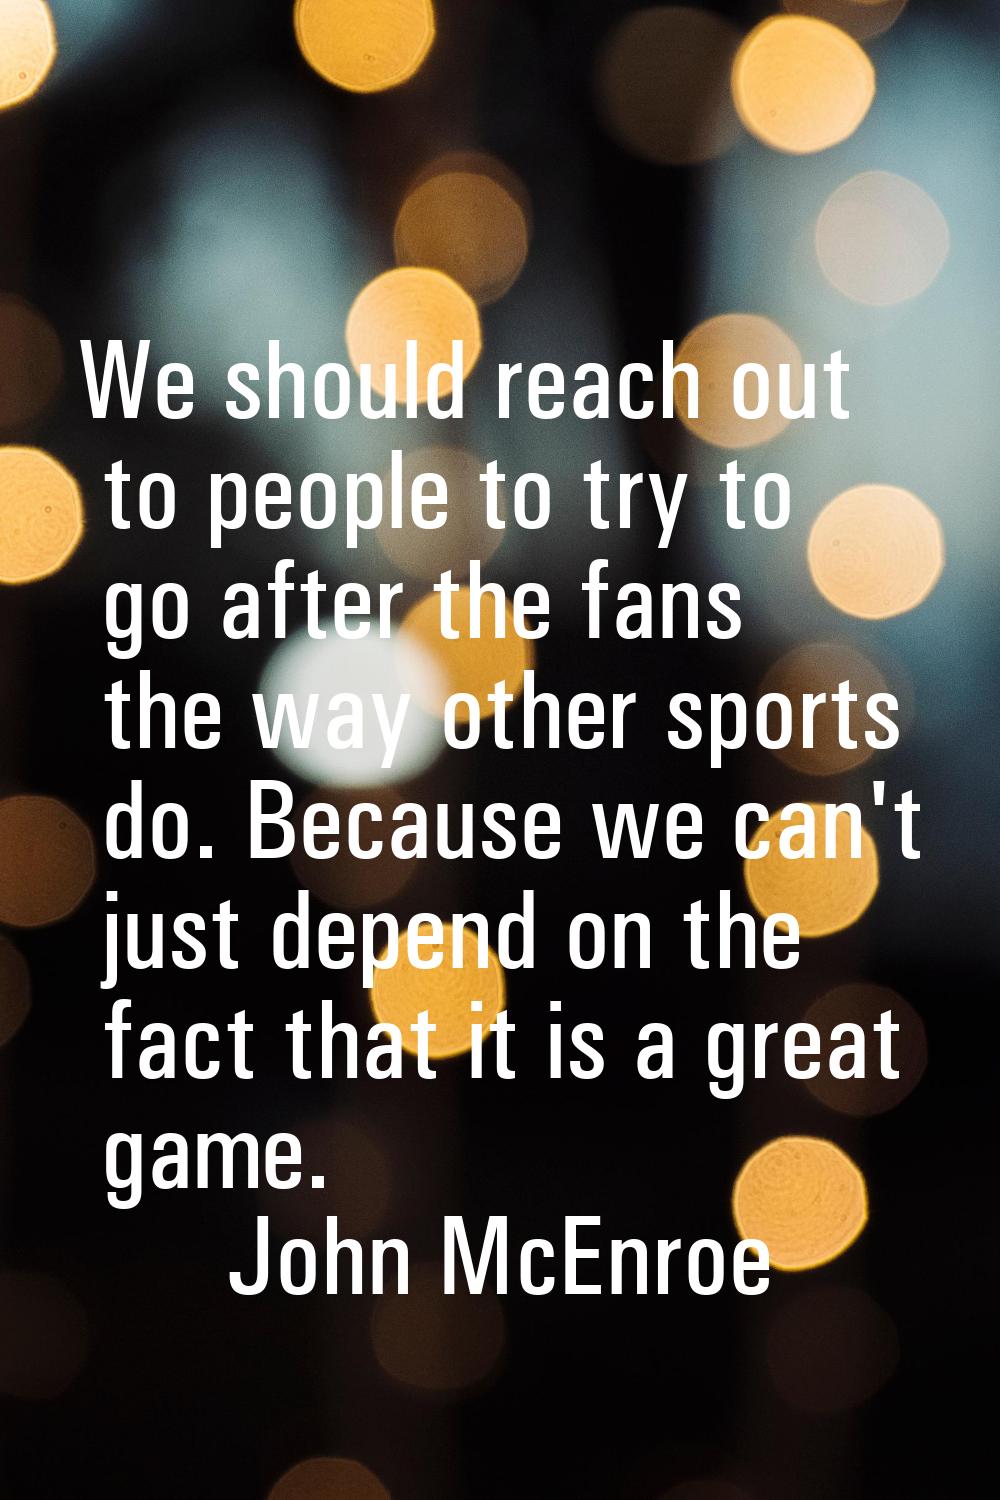 We should reach out to people to try to go after the fans the way other sports do. Because we can't